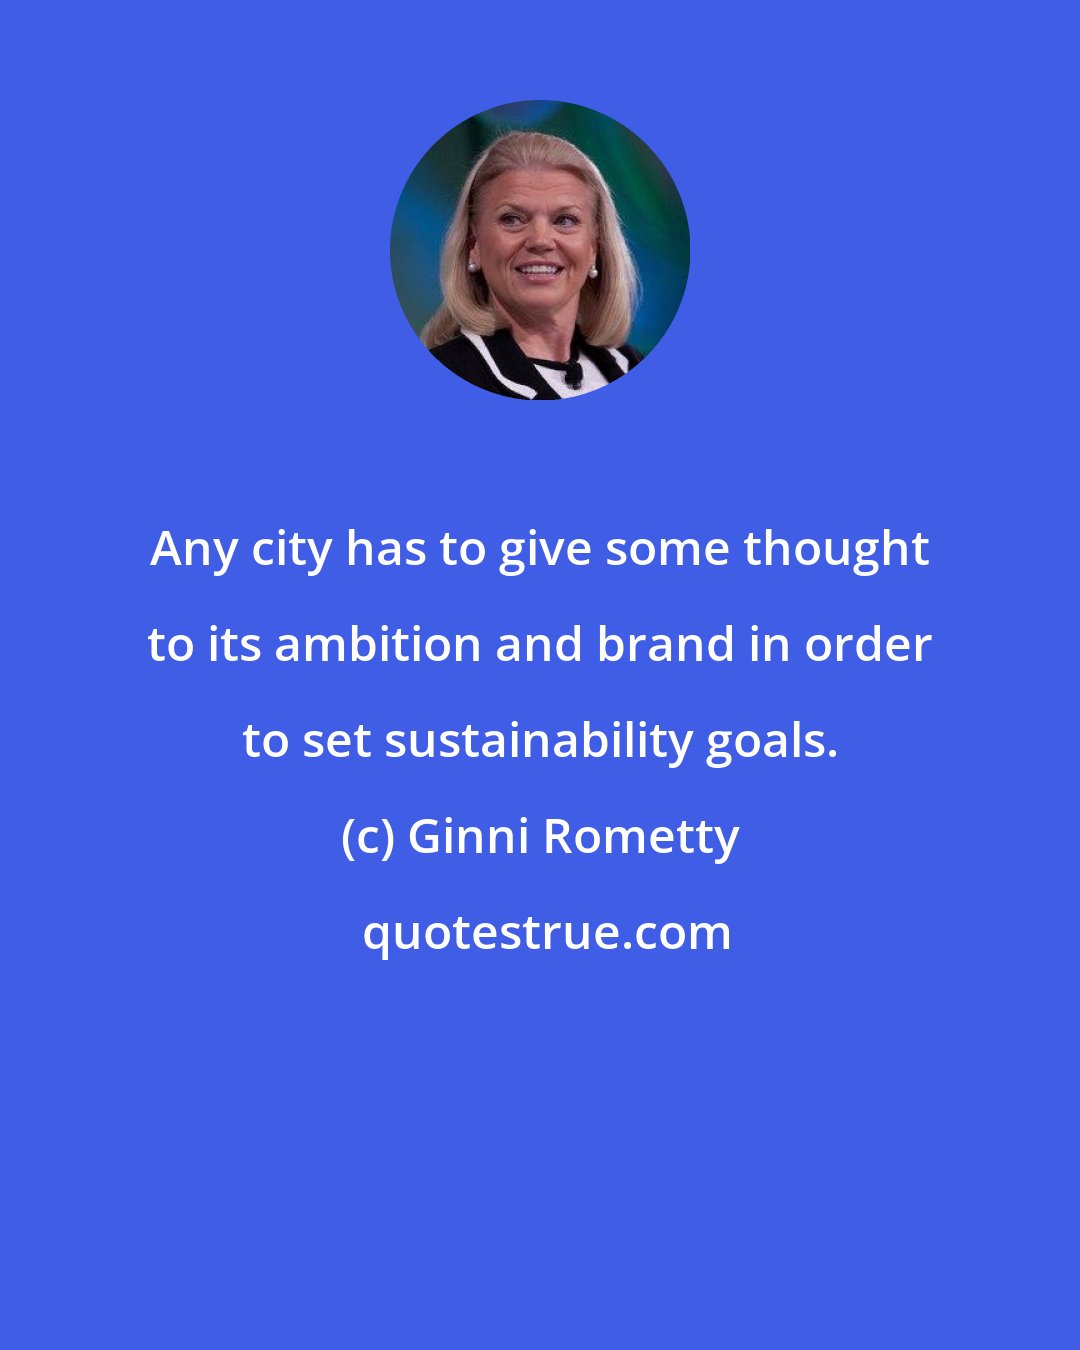 Ginni Rometty: Any city has to give some thought to its ambition and brand in order to set sustainability goals.